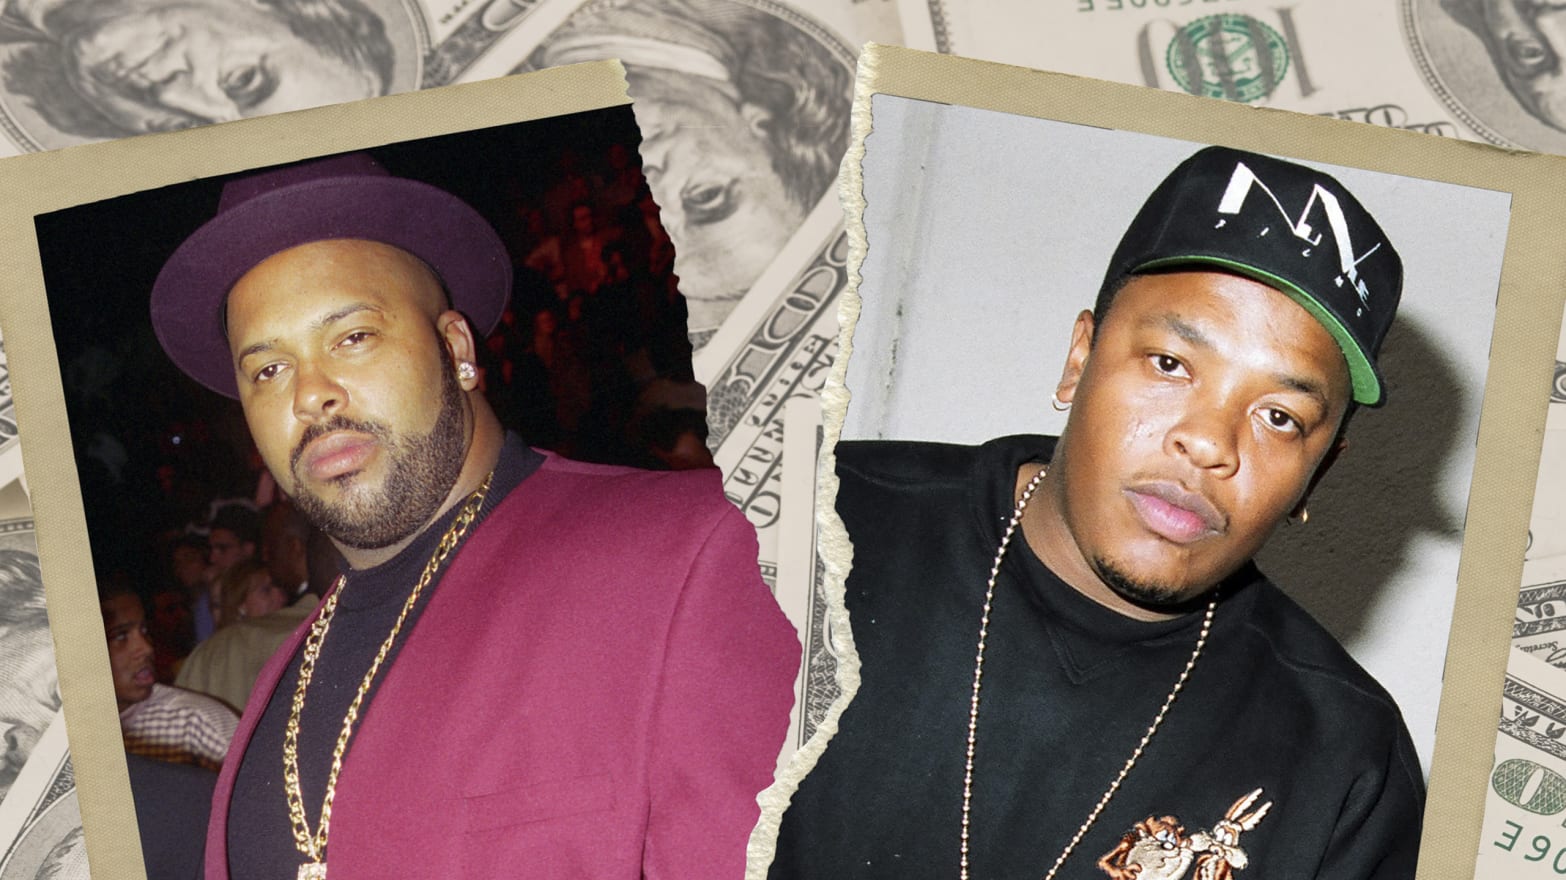 Death Row Records: Big Rappers Screwed Out of Millions in Bankruptcy